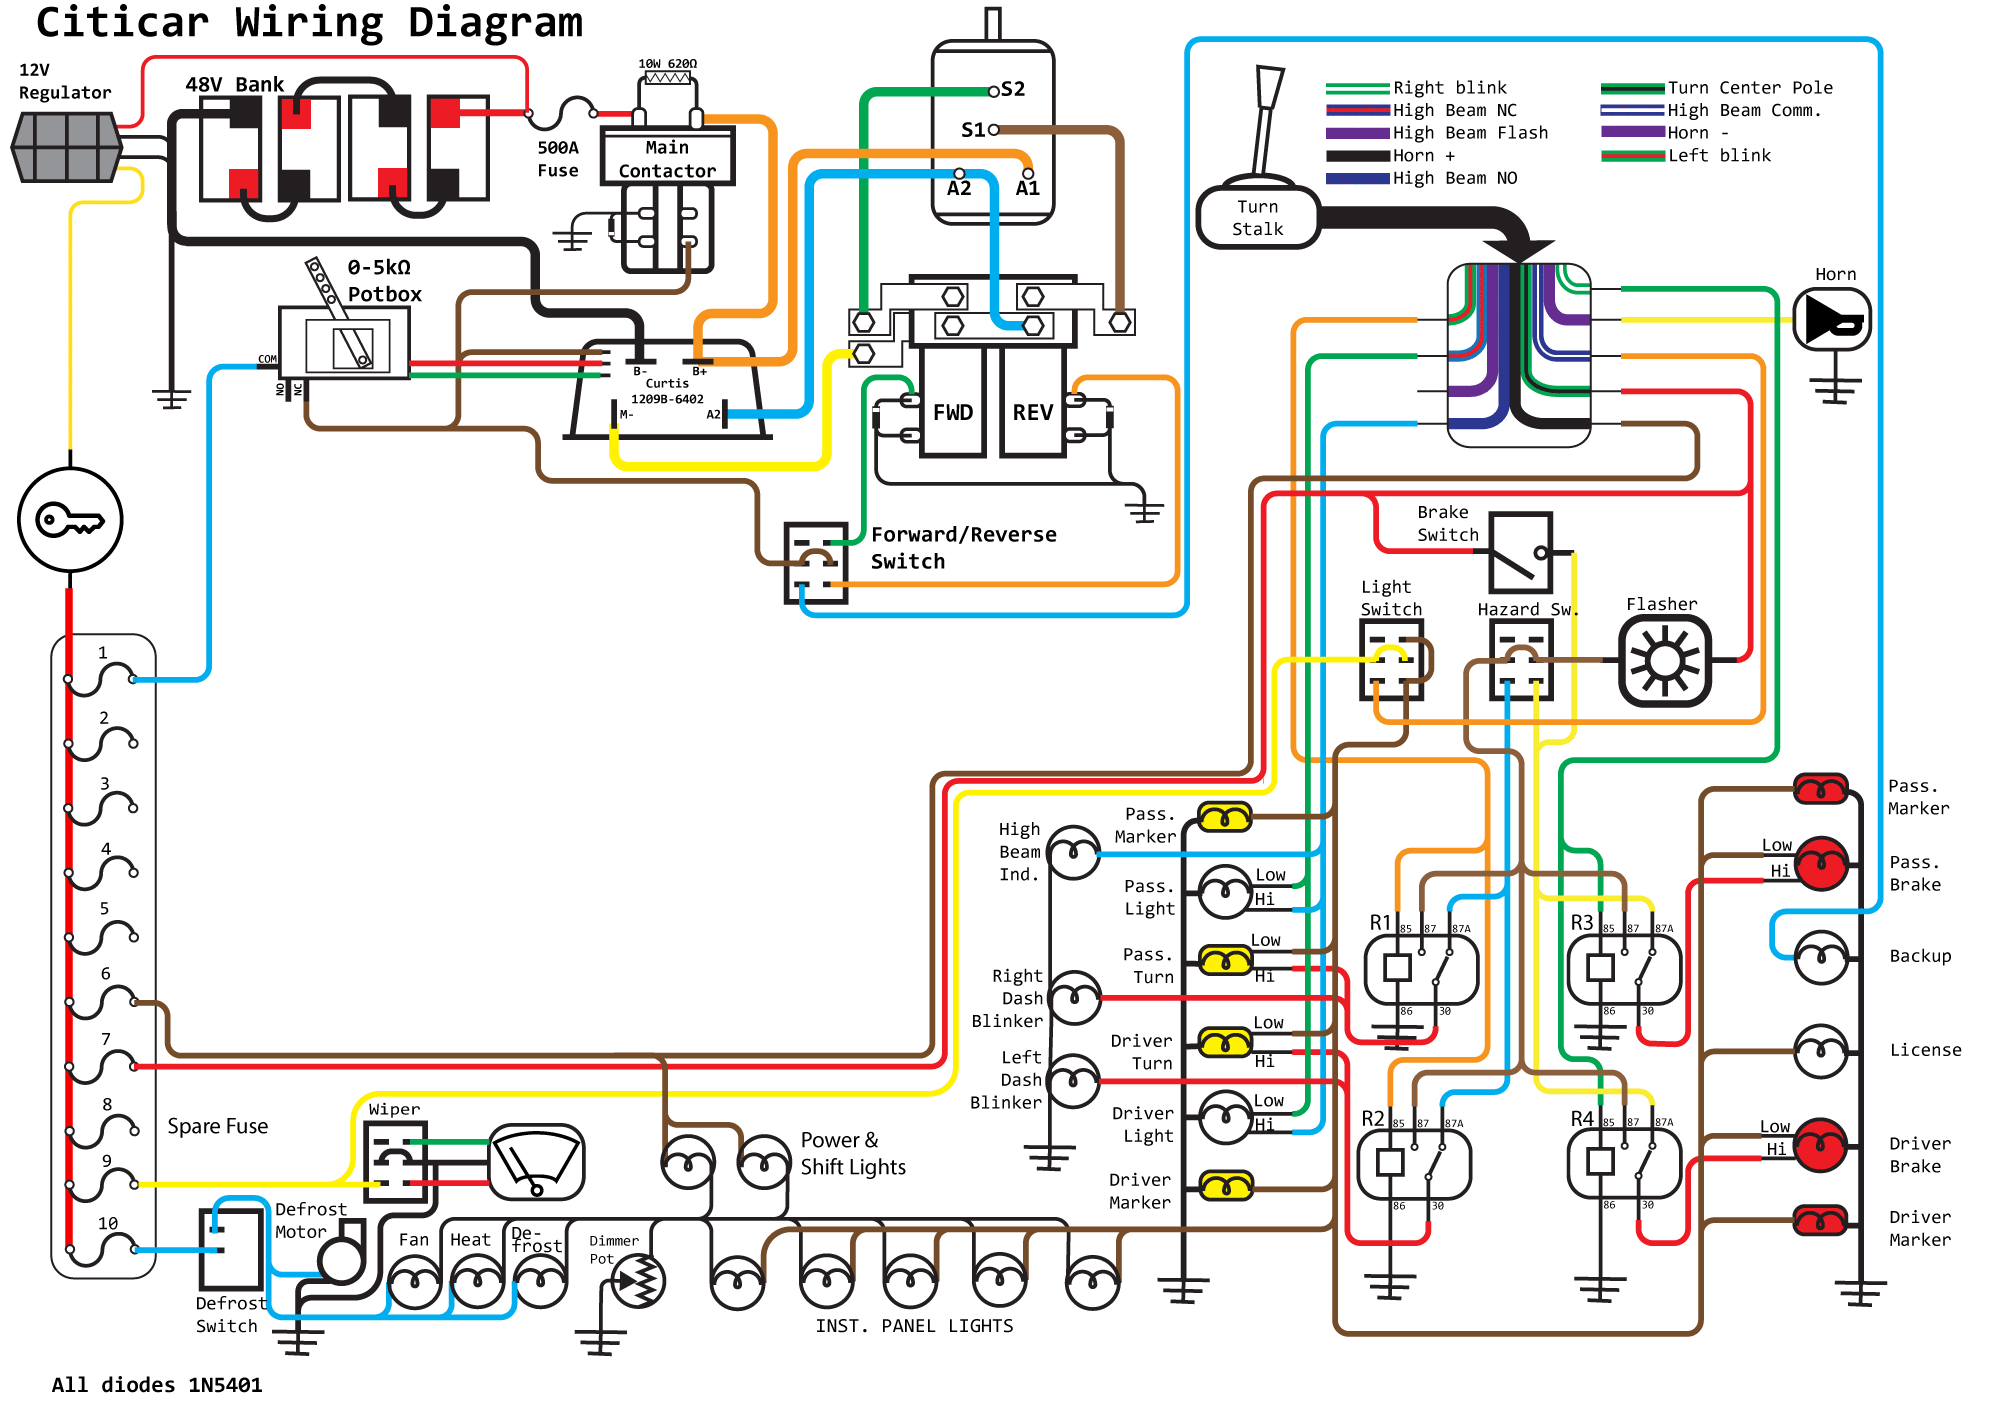 The Better Schematic